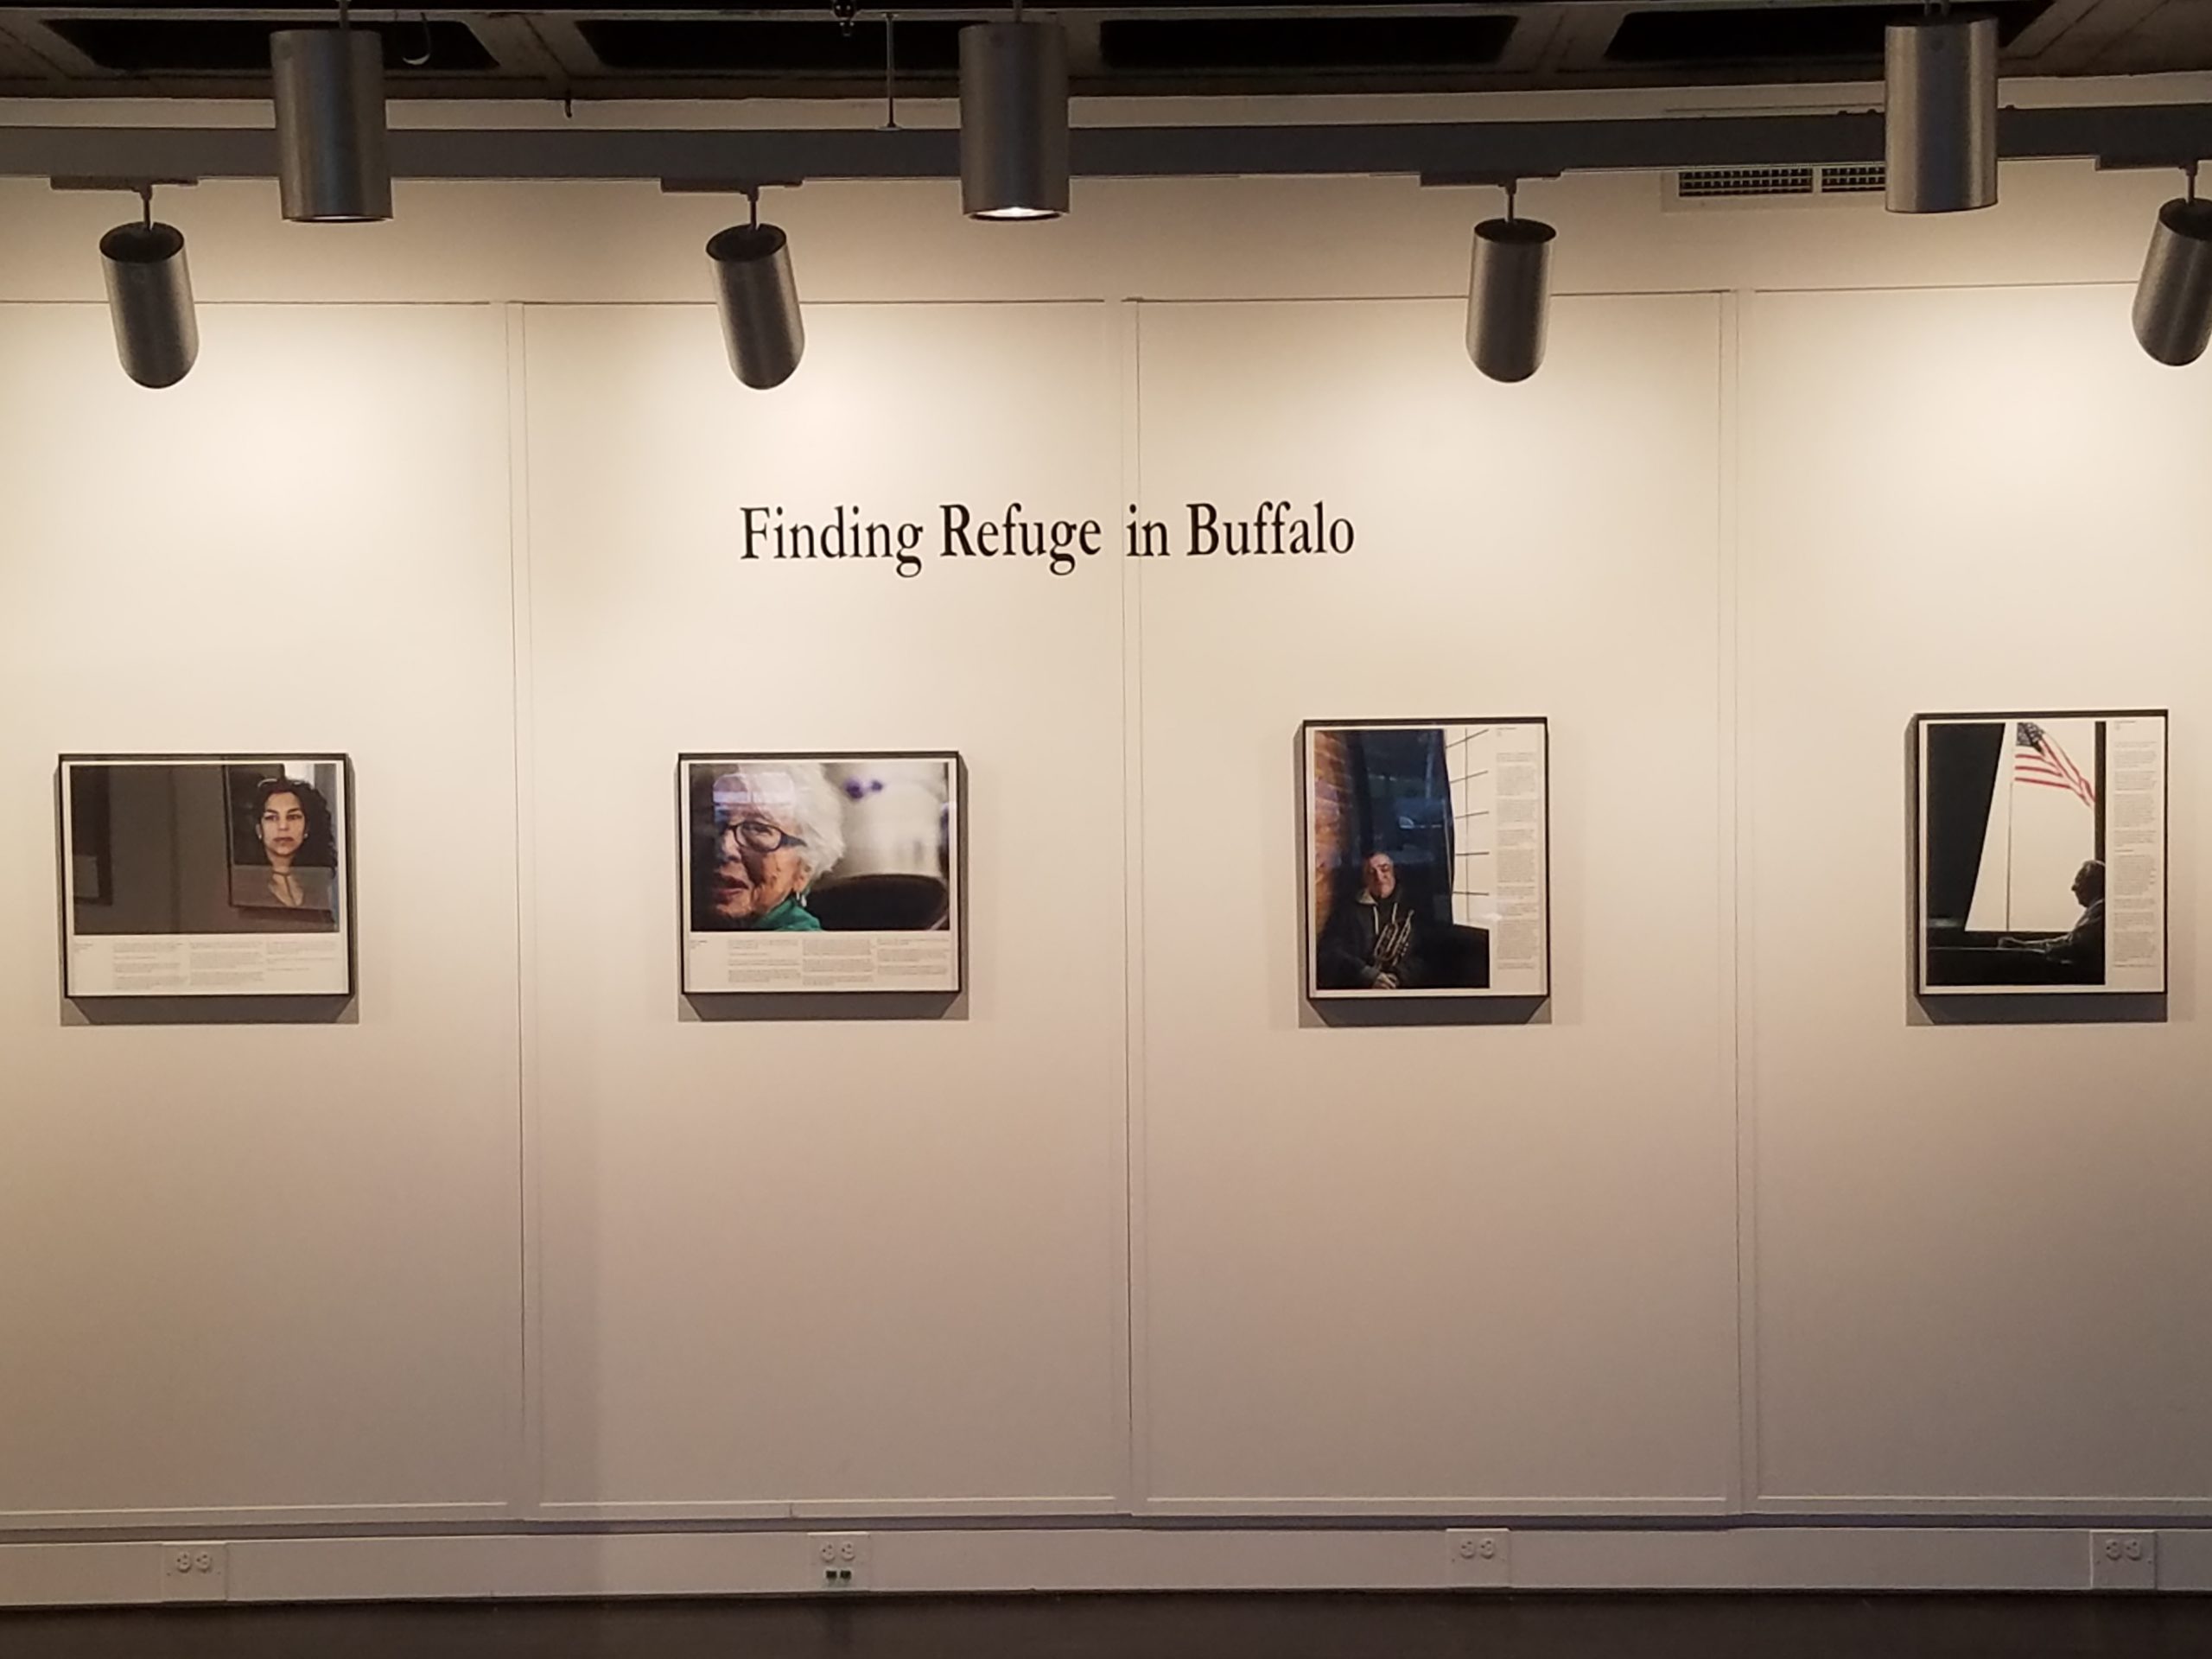 NCCC exhibition explores refugee experience in Buffalo